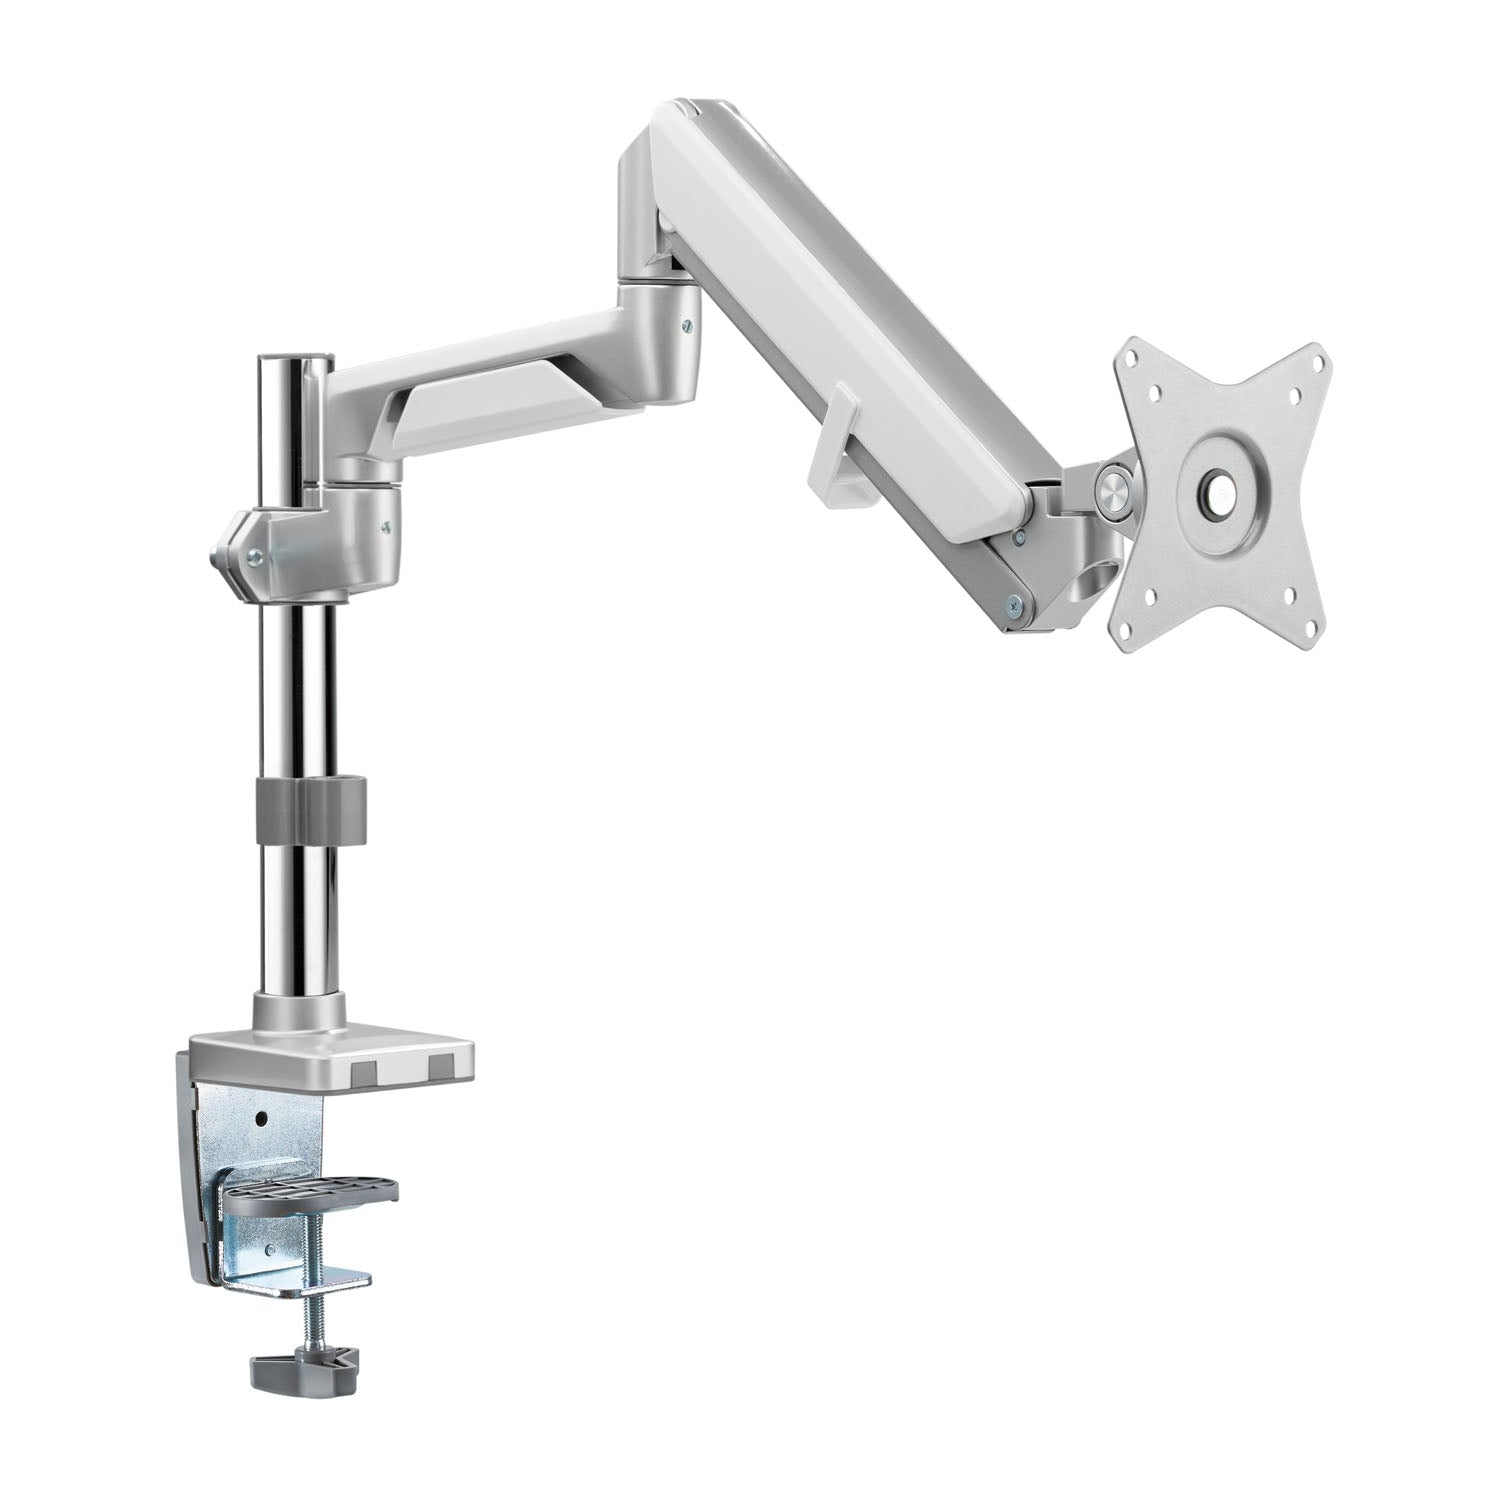 Gadgeton Premium Pole Mounted Single Monitor Arm, Stand And Mount For Gaming And Office Use 17” - 32” Up To 8 KG - Silver